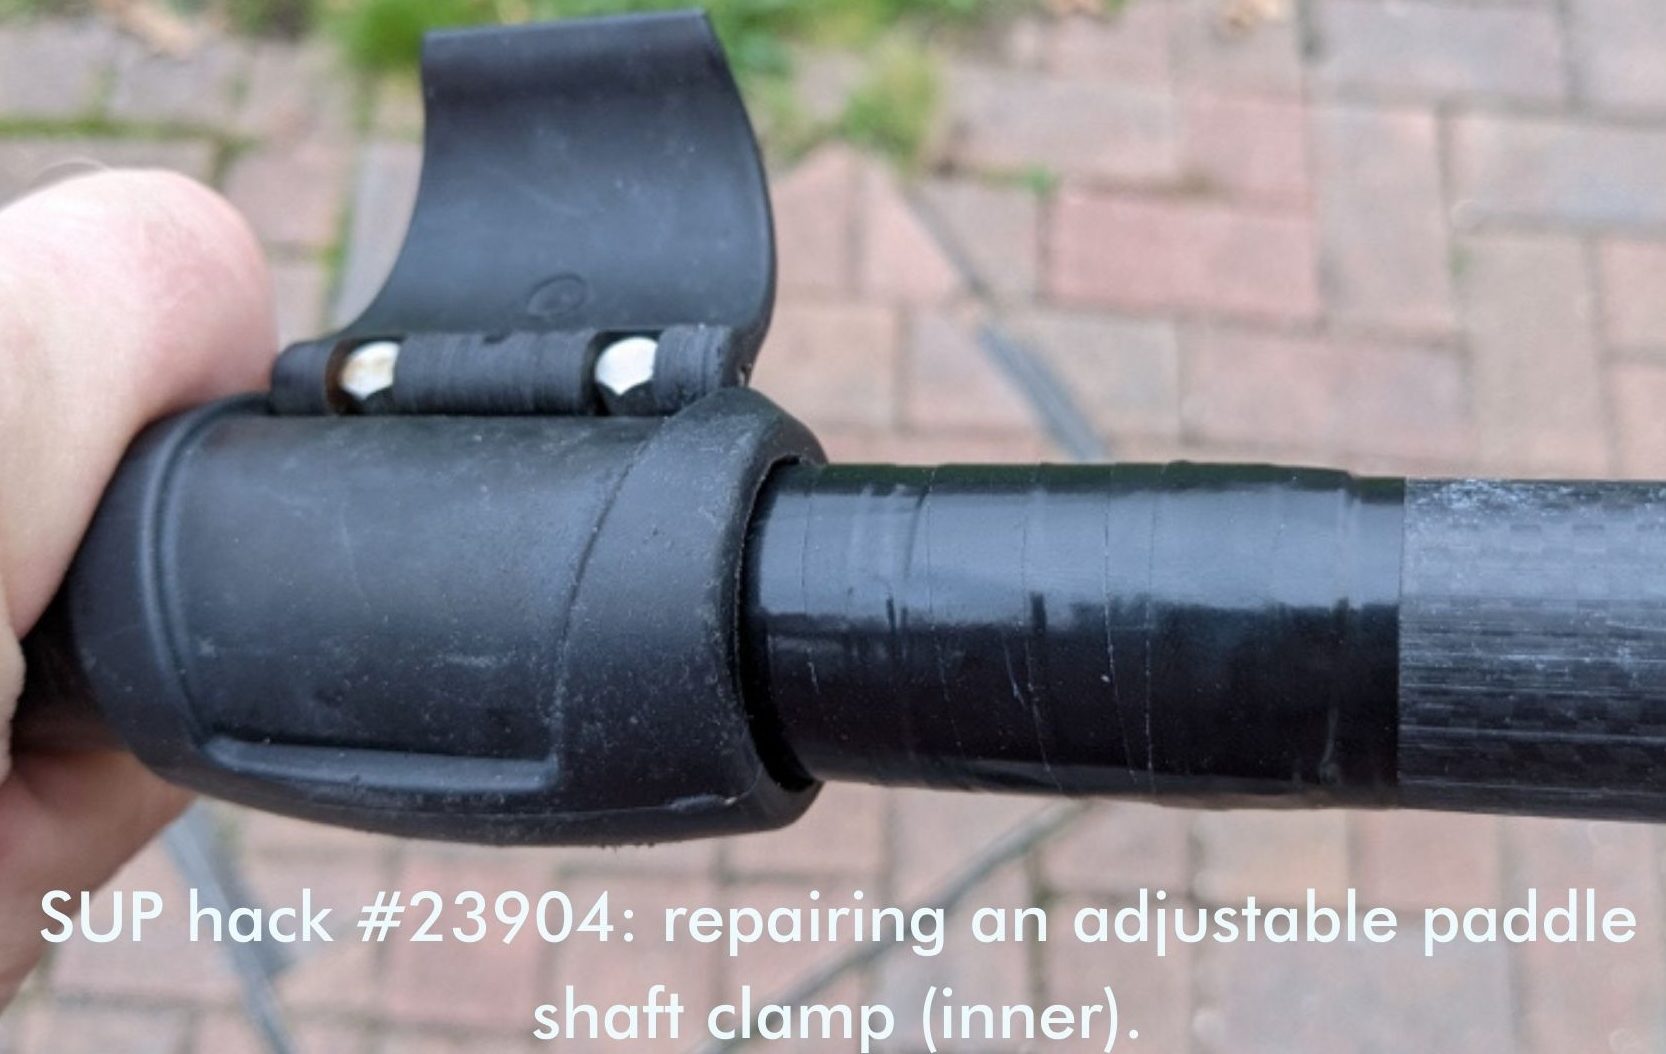 You are currently viewing SUP hack #23904: repairing an adjustable paddle shaft clamp (inner).